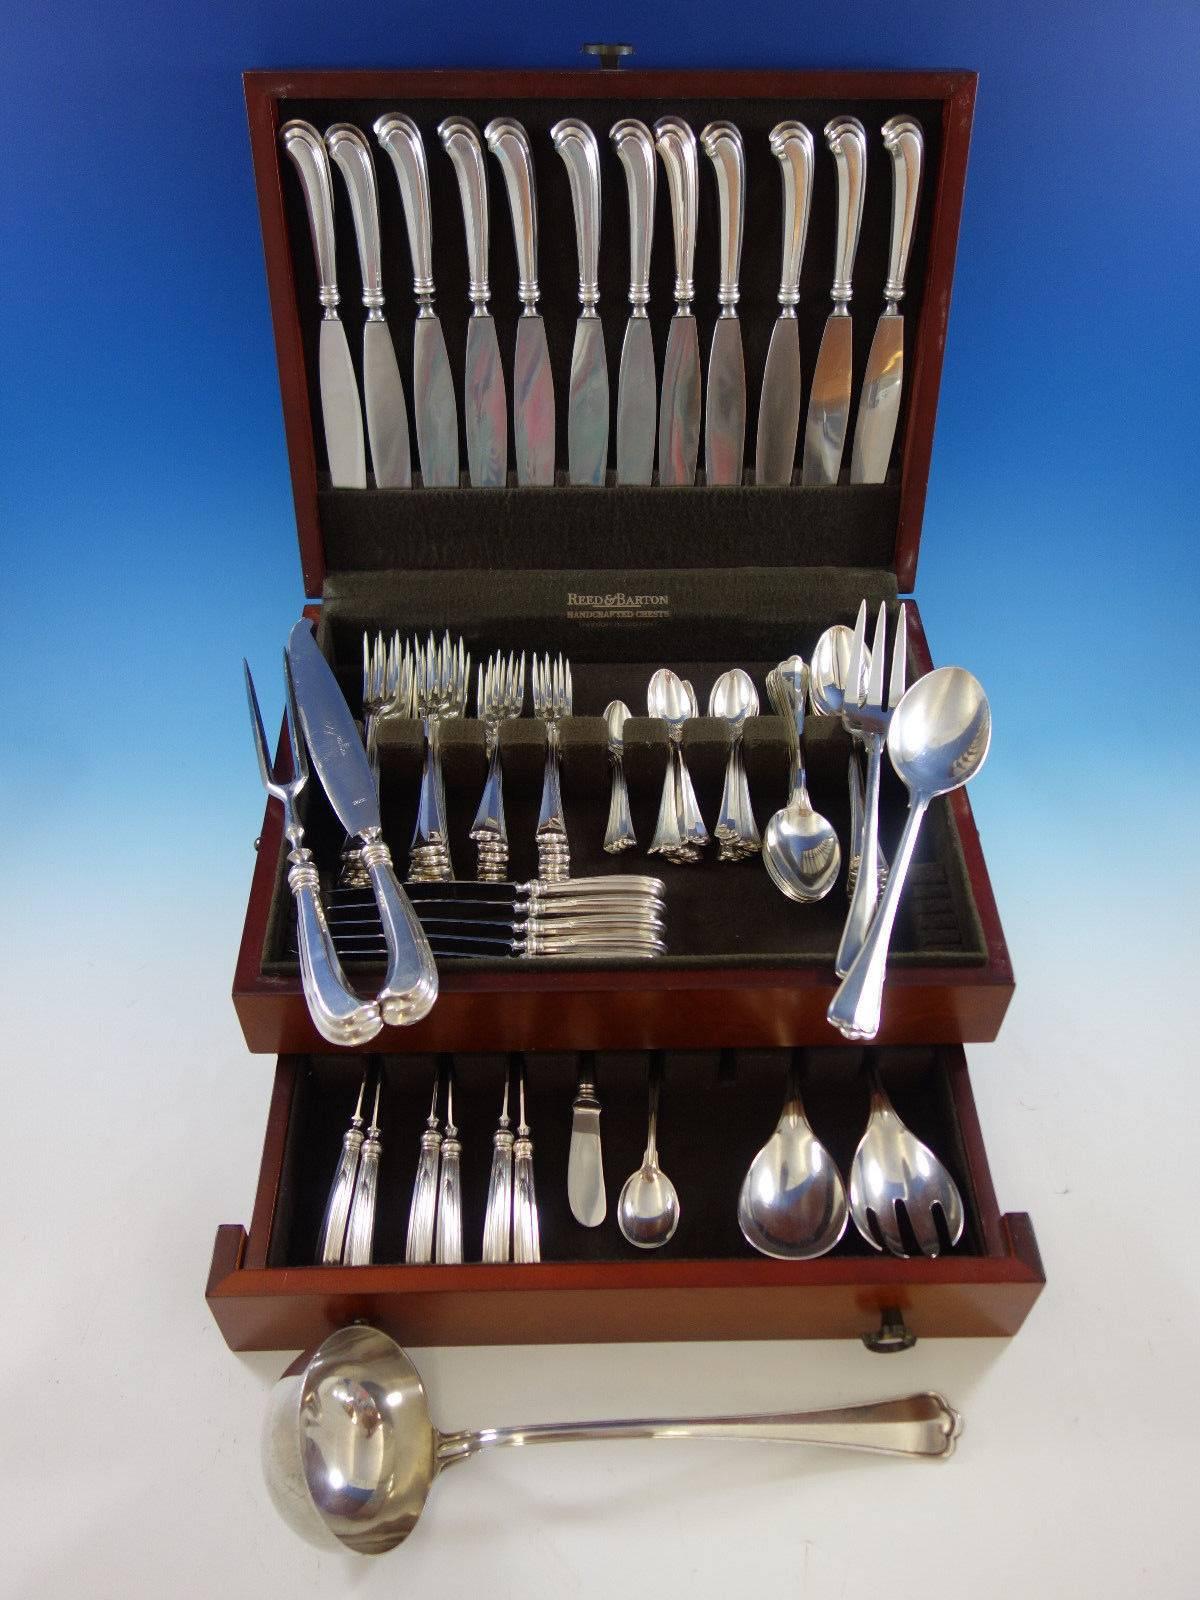 Dinner size St. Mark by Clementi, Italy 800 silver flatware set of 97 pieces. This set includes: 

12 large dinner size knives, 10 1/4